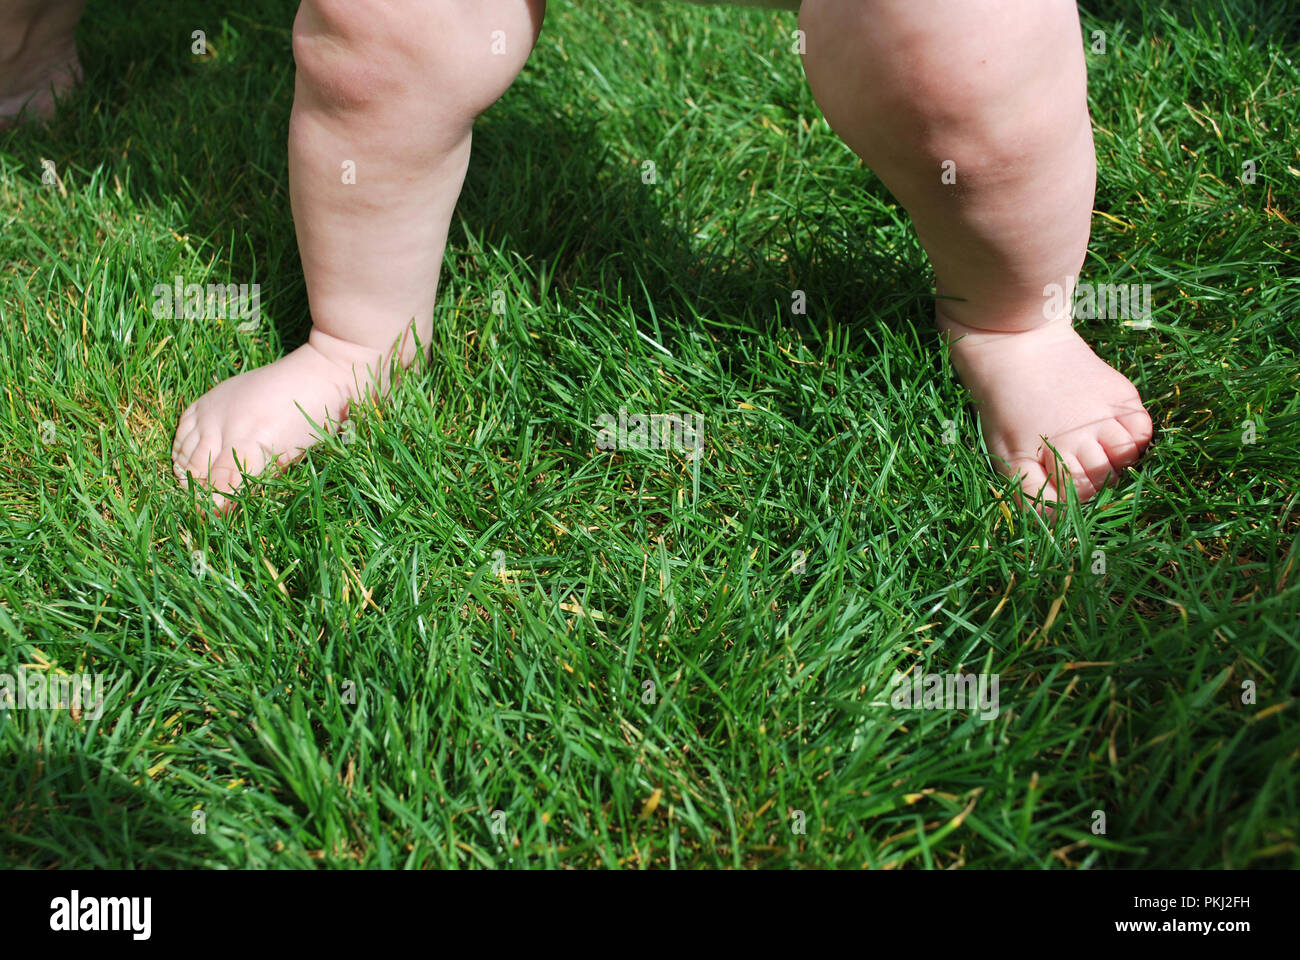 toddler standing bare feet and legs on green grass with shadows taking first steps Stock Photo